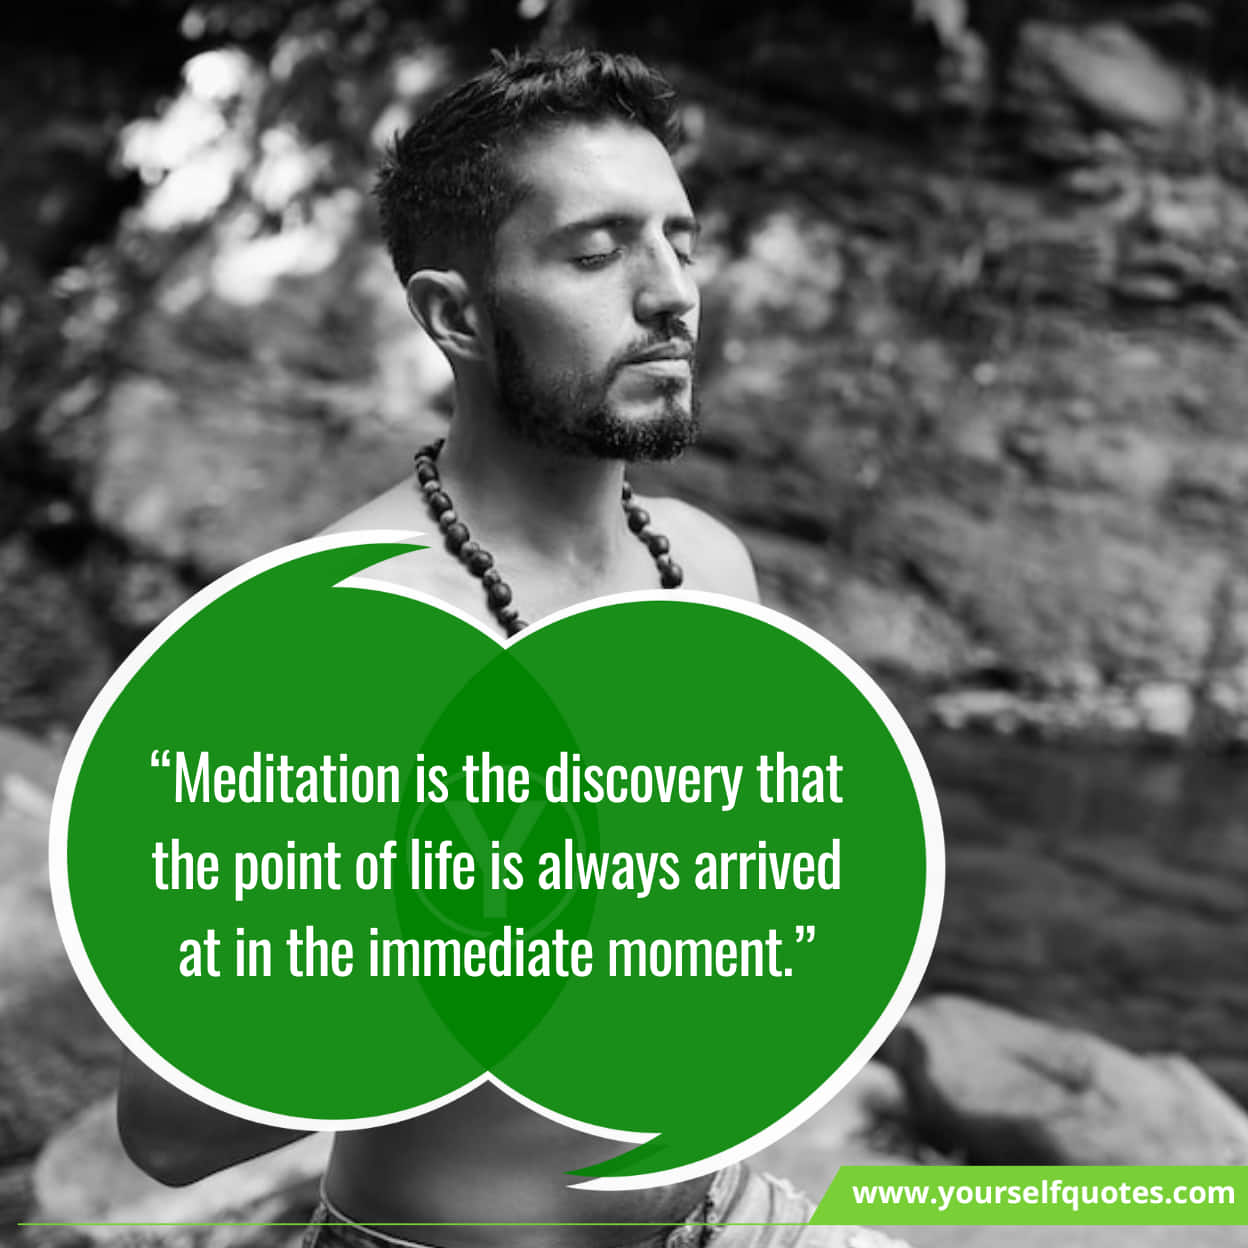 Meditation Quotes About Peace of Mind